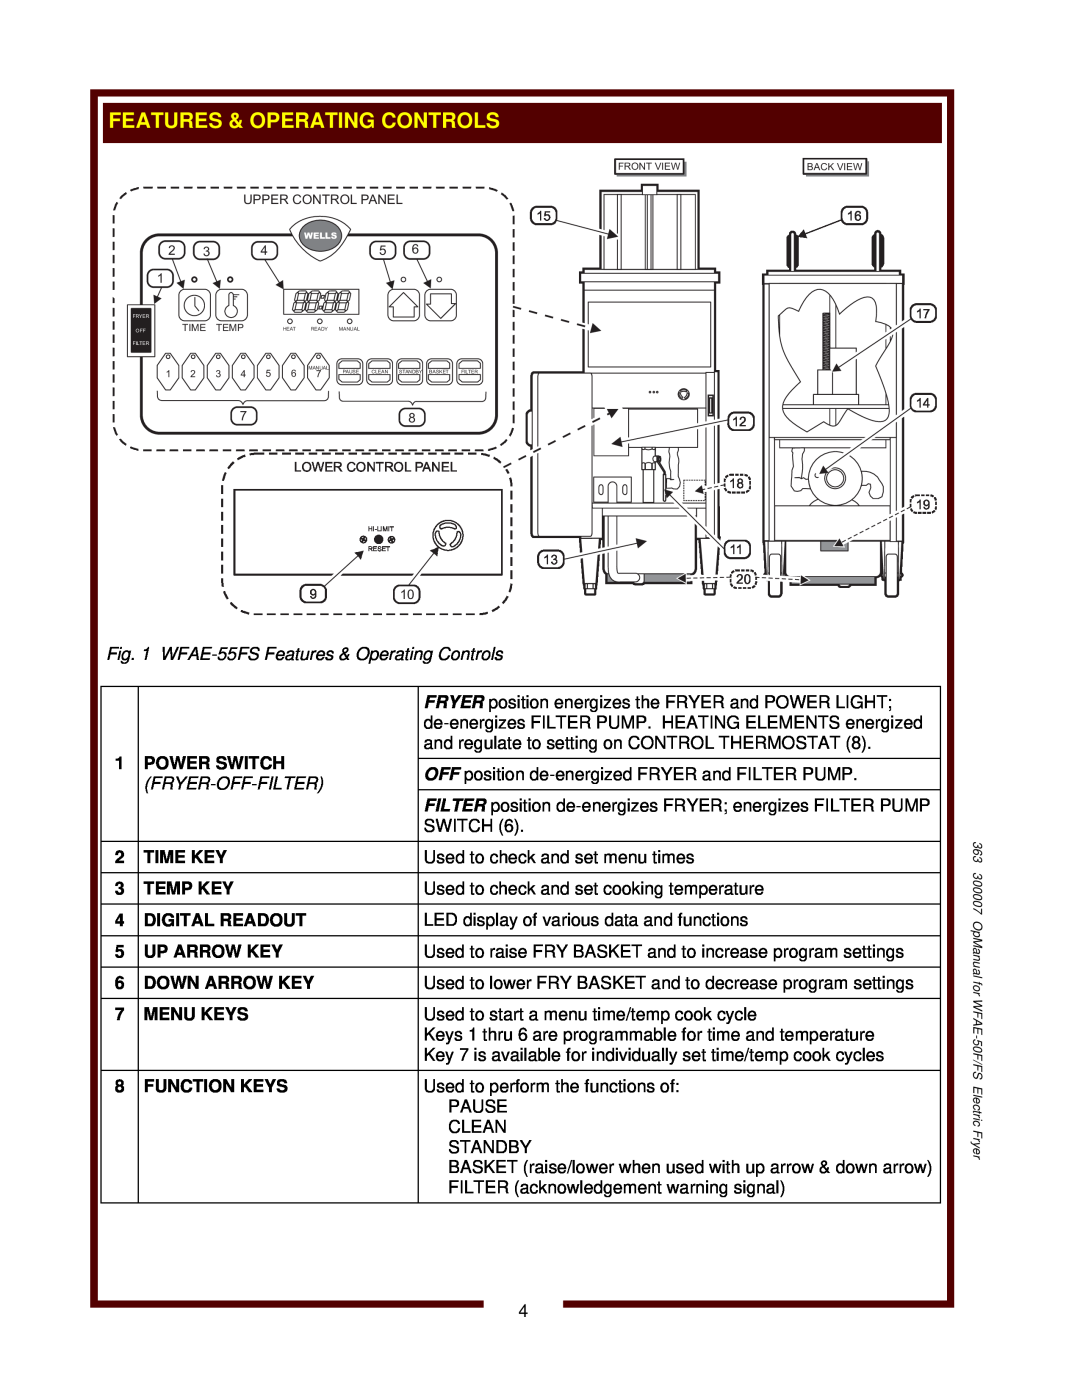 Wells operation manual WFAE-55FSFeatures & Operating Controls, Power Switch, Fryer-Off-Filter 